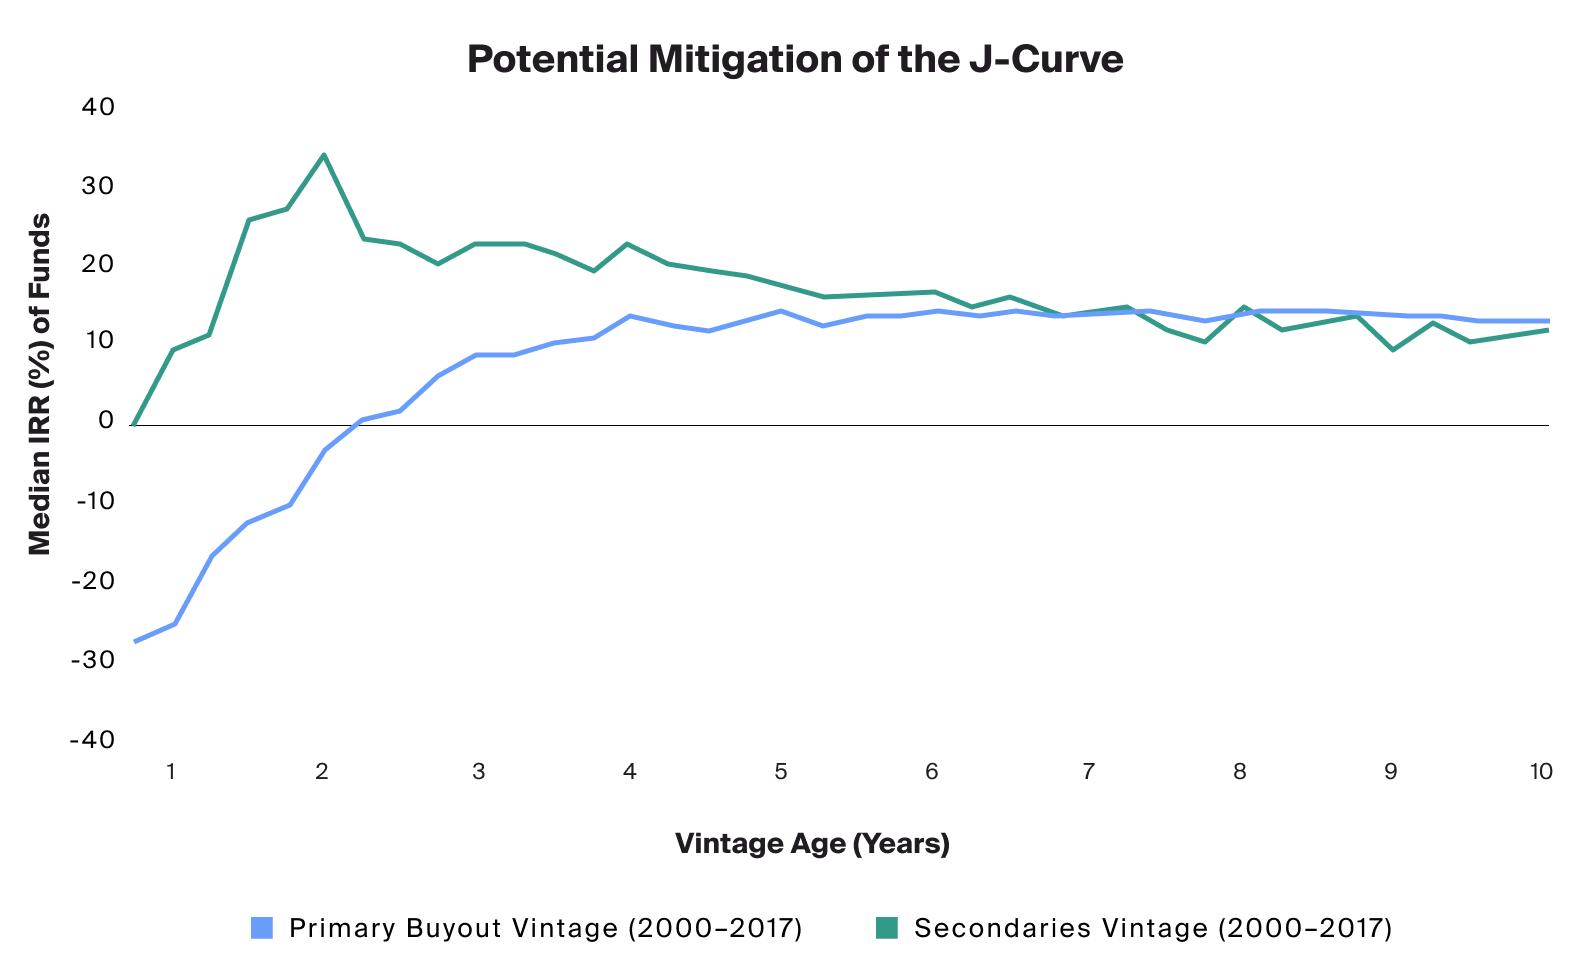 Secondaries tend to avoid the period of negative returns, or so-called J-curve, common in the first few years of a traditional PE fund’s lifecycle